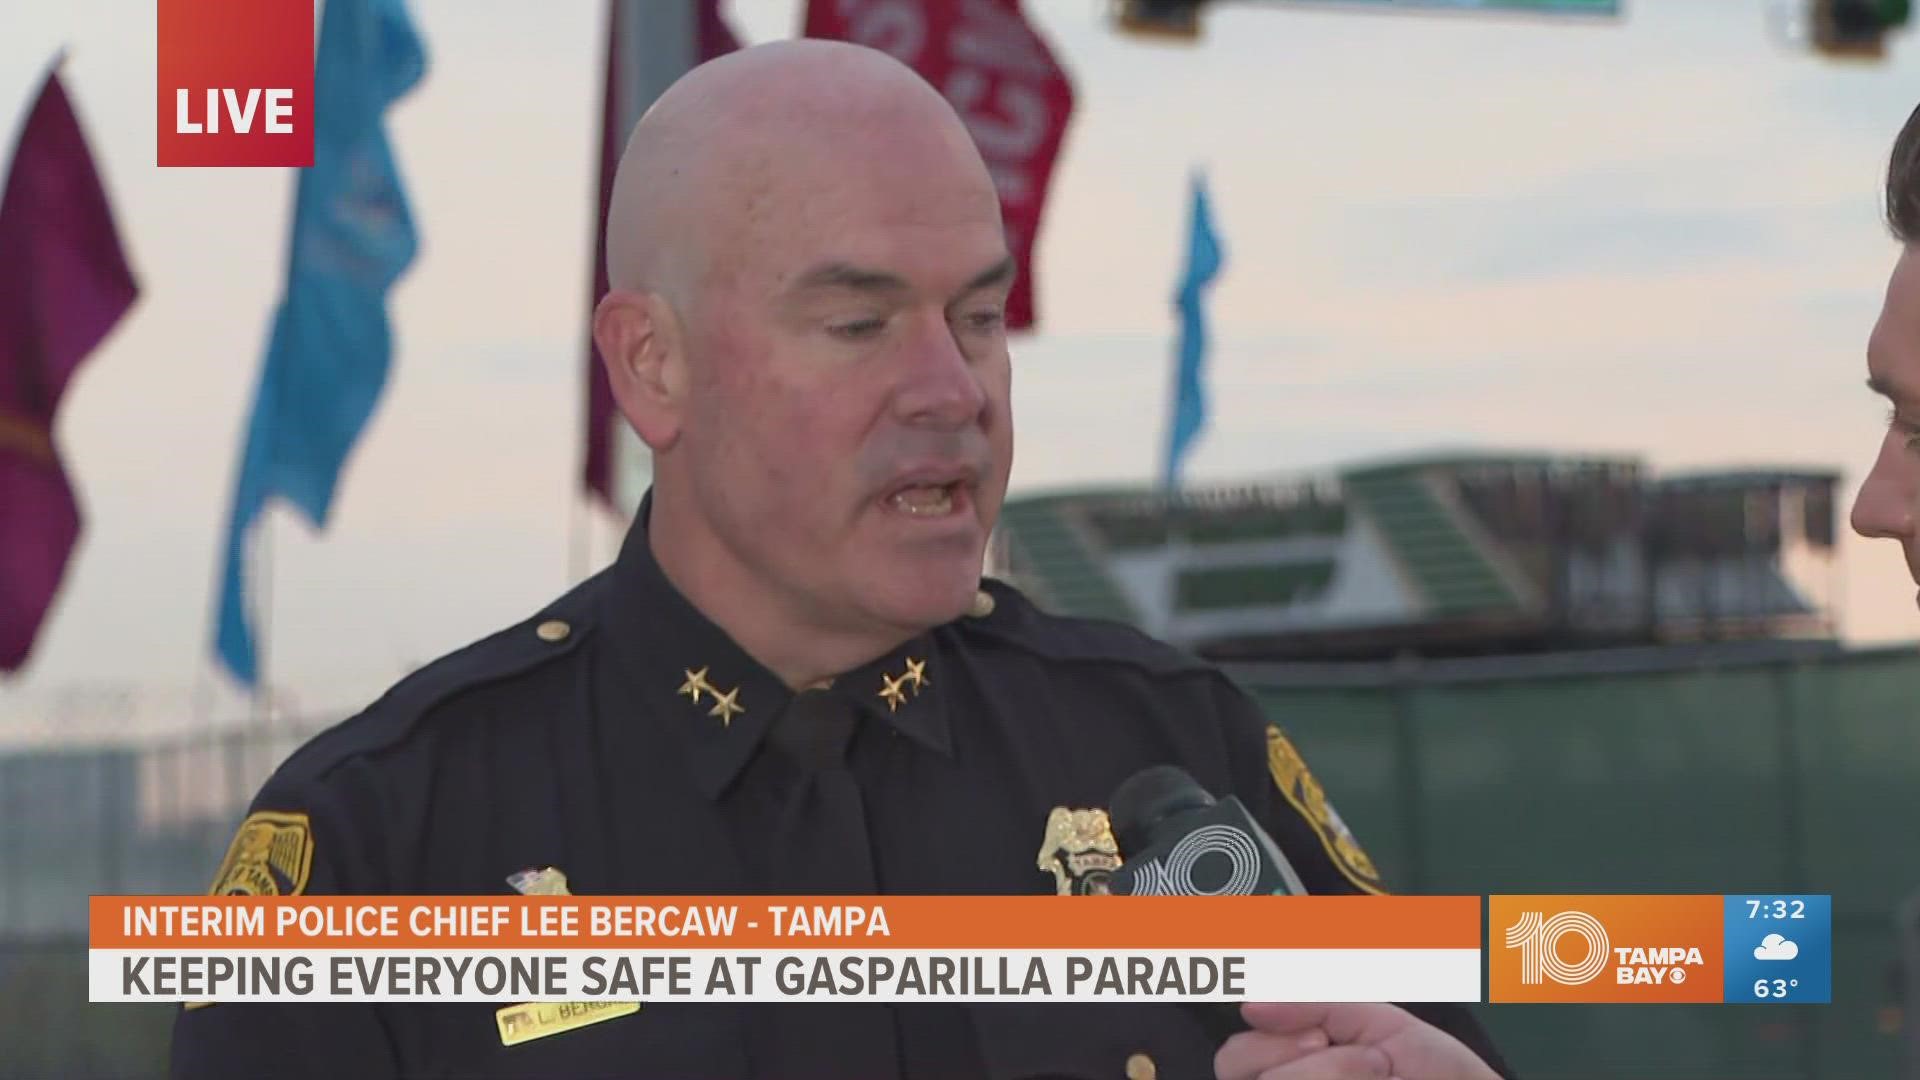 The 2023 Children's Gasparilla Parade is happening from noon to 7:30 p.m. on Saturday, Jan. 21.